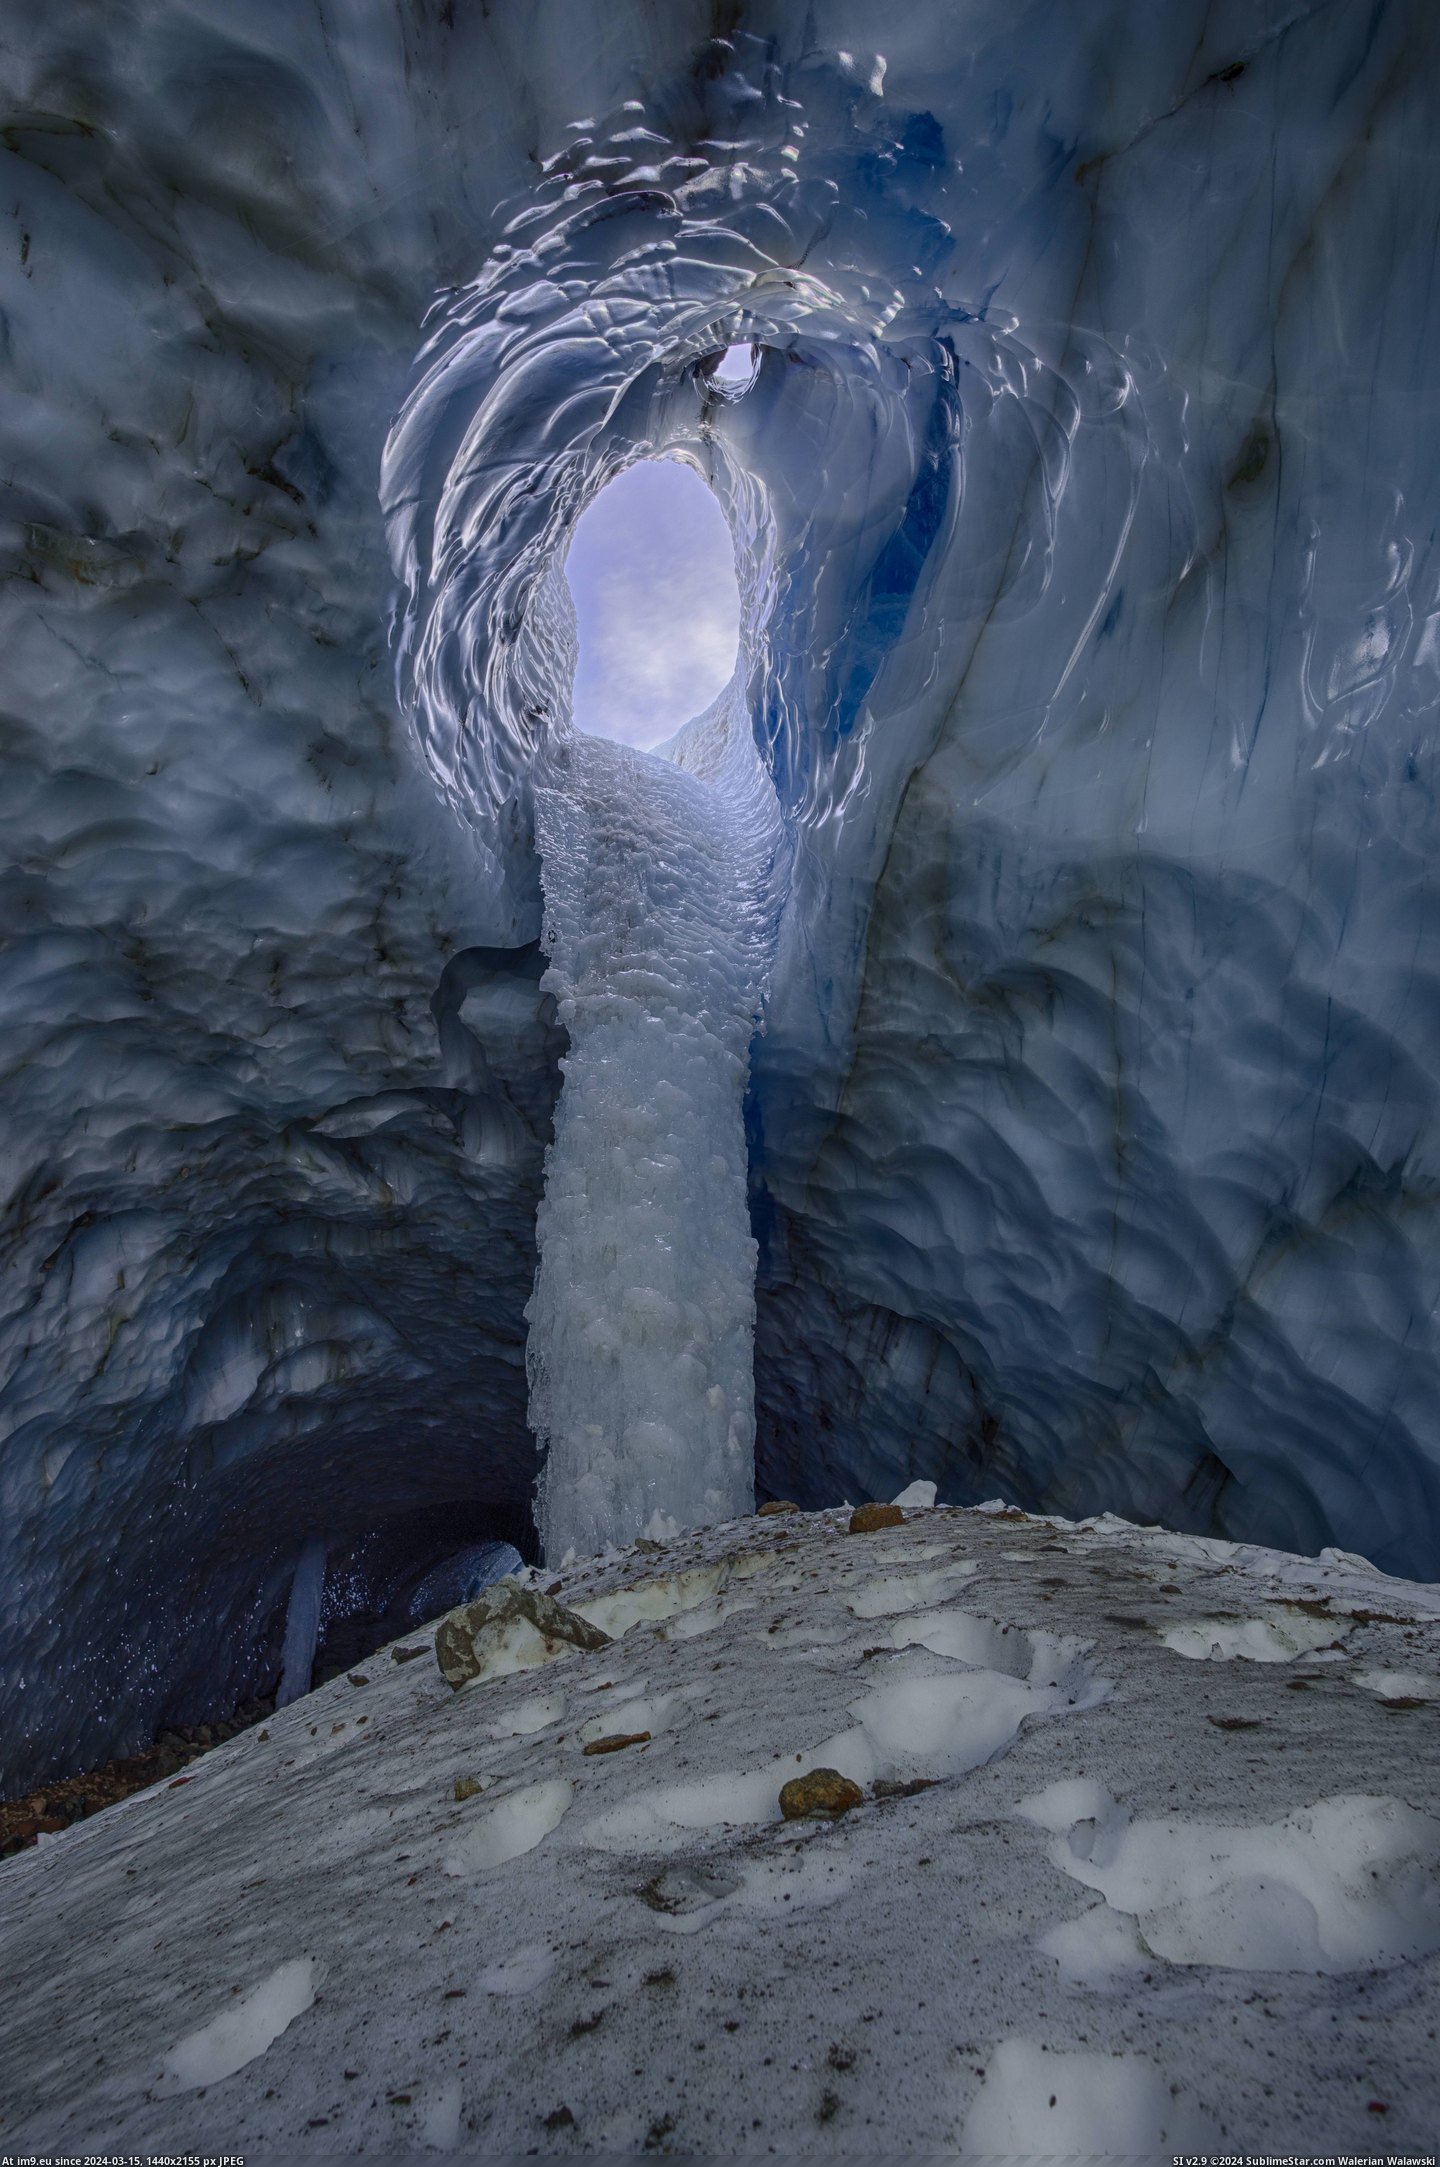 #Photo #Oregon #Waterfall #Hood #Cave #Glacier #Frozen [Earthporn] A view to the outside through a frozen waterfall inside a glacier cave on Mt. Hood, Oregon  [4009x6011] Photo by: Ja Pic. (Obraz z album My r/EARTHPORN favs))